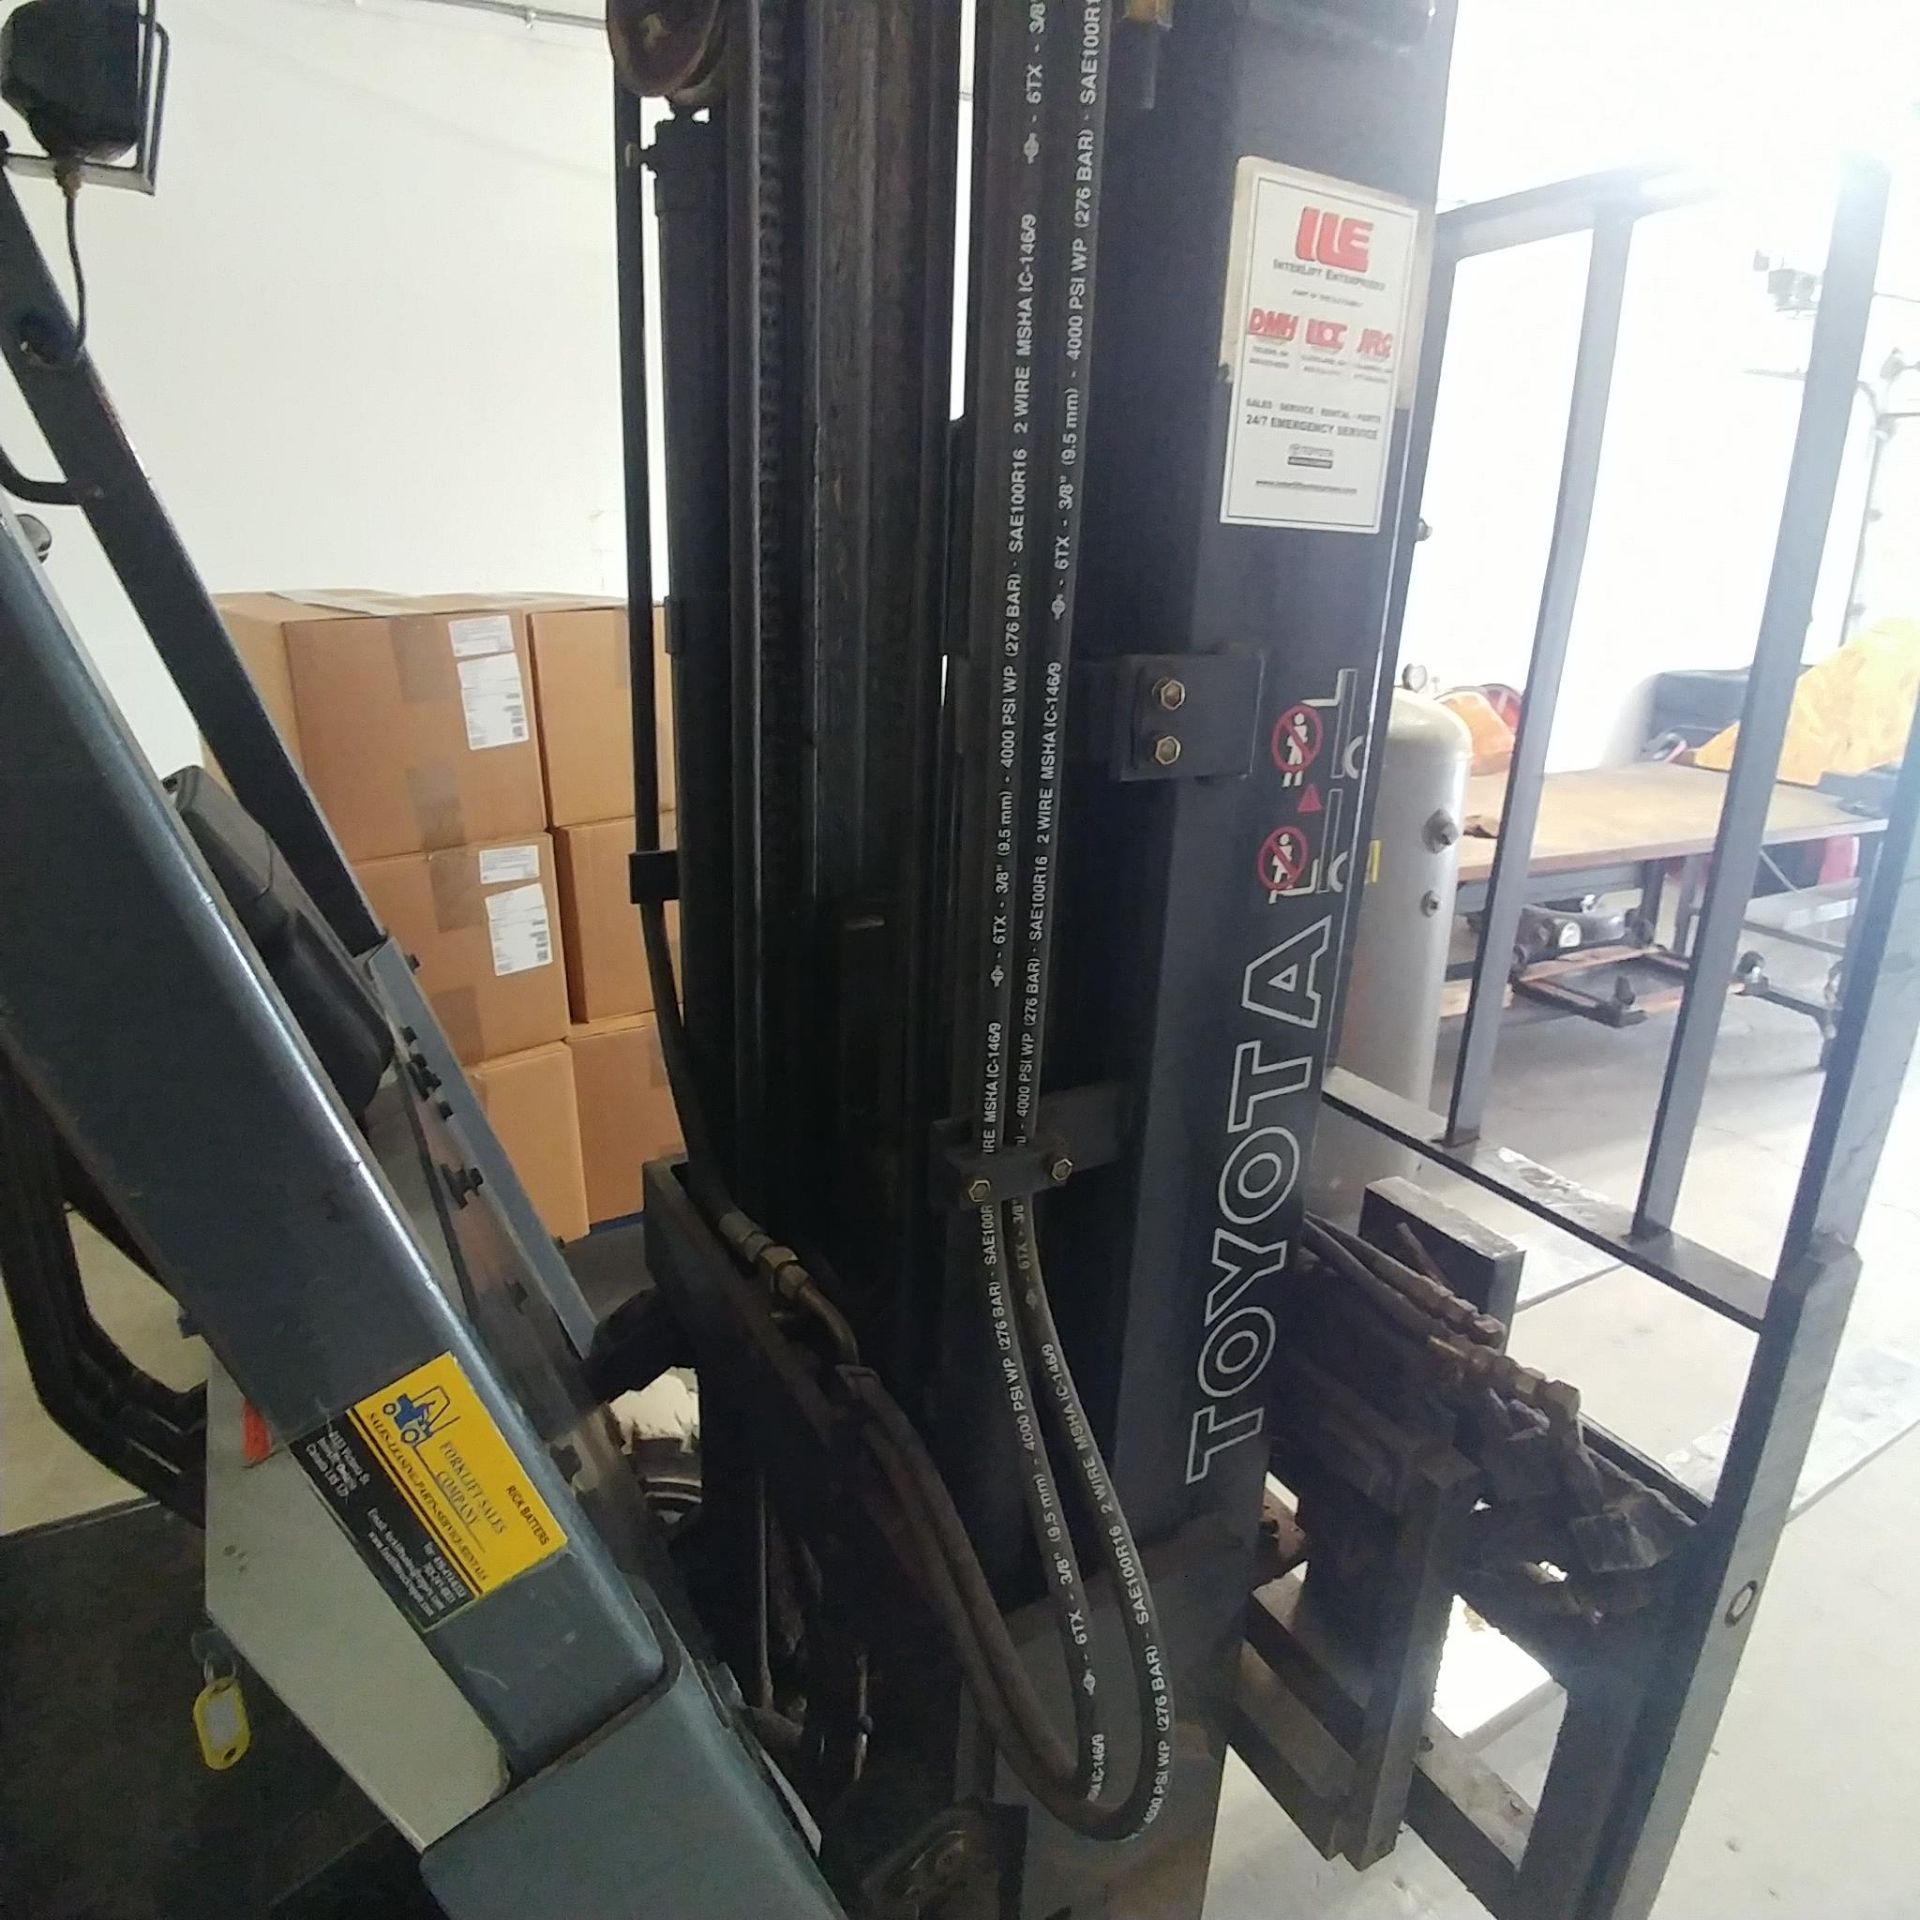 Toyota Electric Forklift Truck - 3 Stage - c/w chargers - 5000 lb capacity - Image 16 of 28